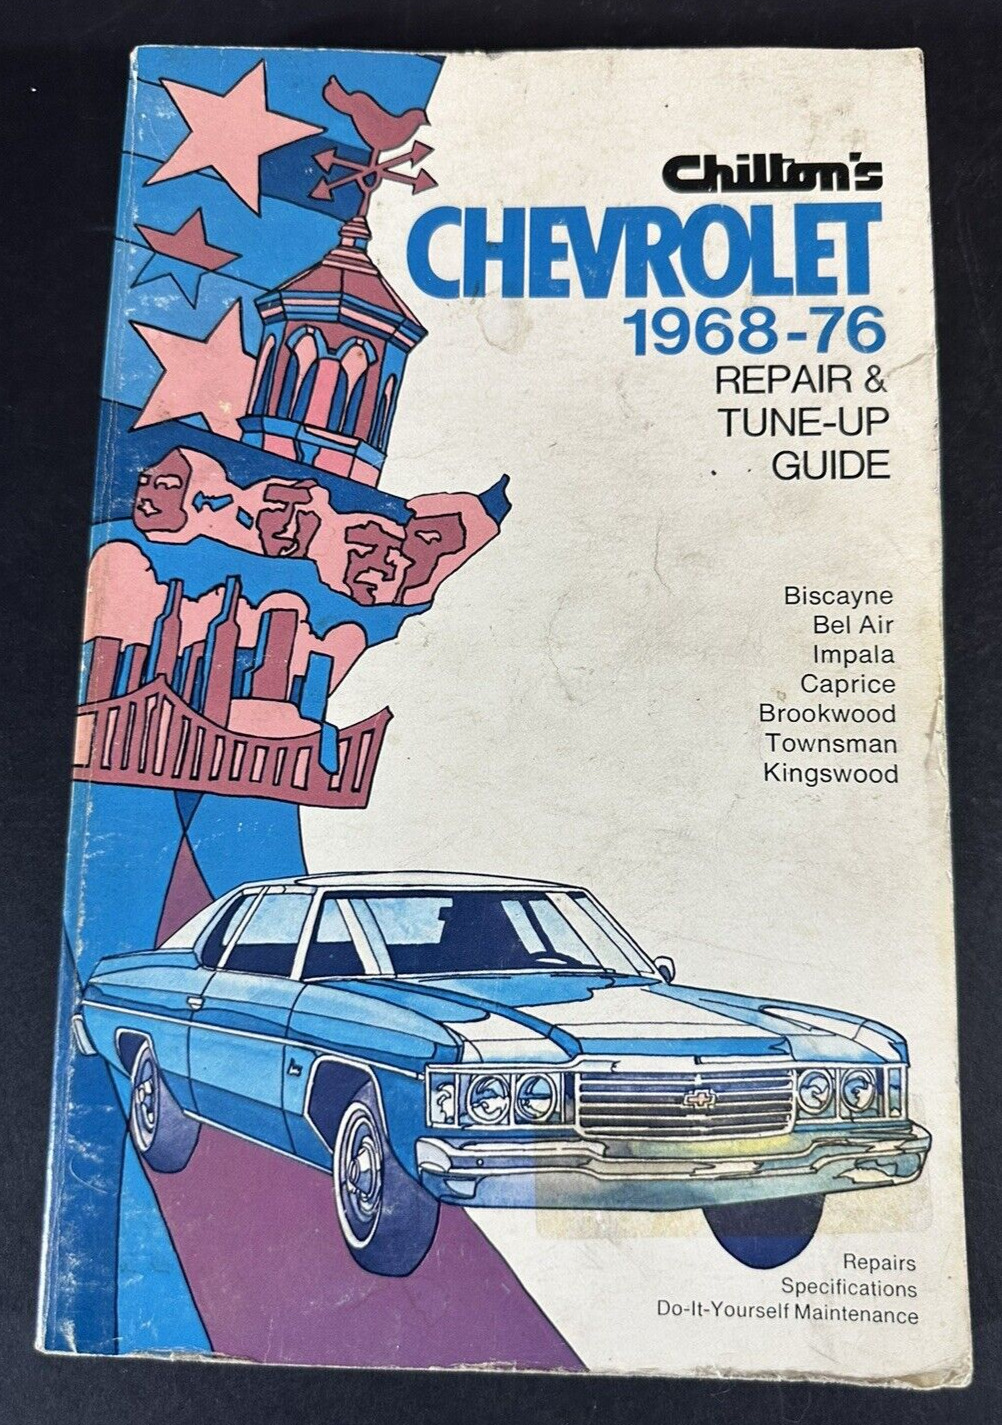 Chilton's CHEVROLET Repair & Tune-Up Guide 1968-76 Hardcover Specifications USED